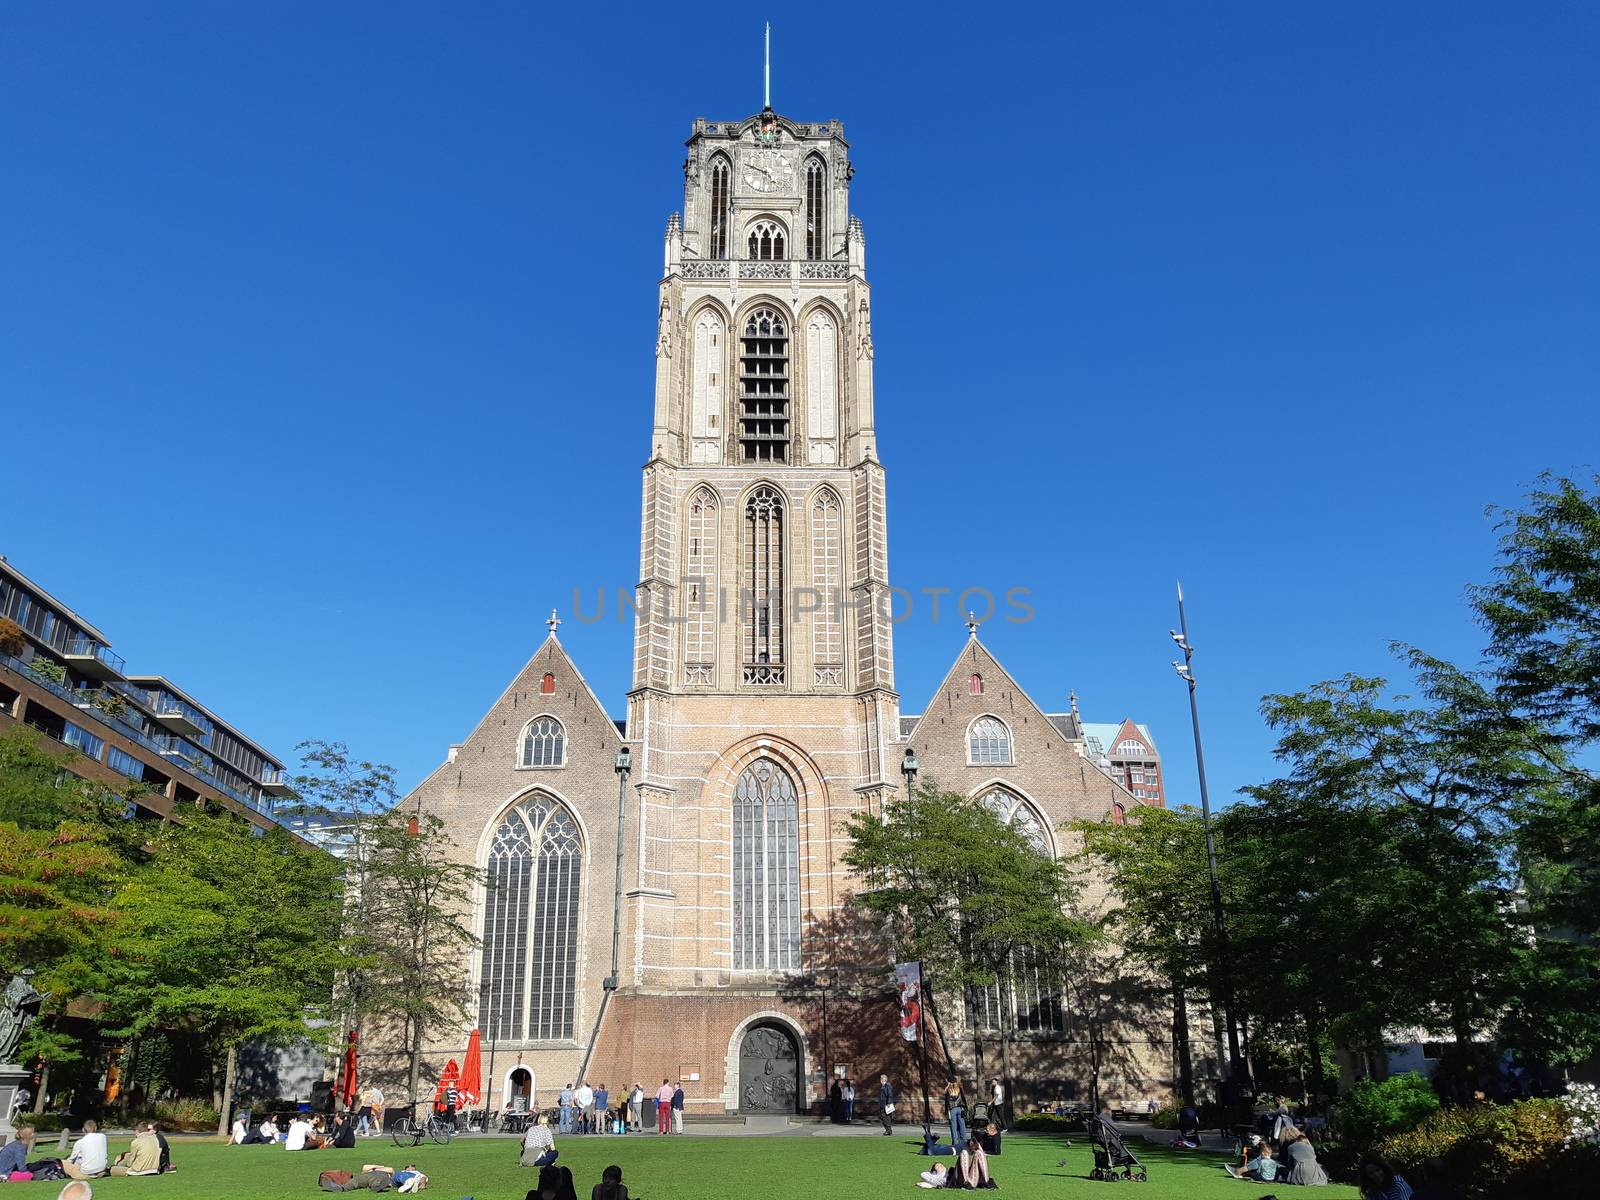 View on the Laurenskerk (Laurens Church) with people enjoying the sun on the Grotekerkplein. Netherlands traveland tourism. by kb79